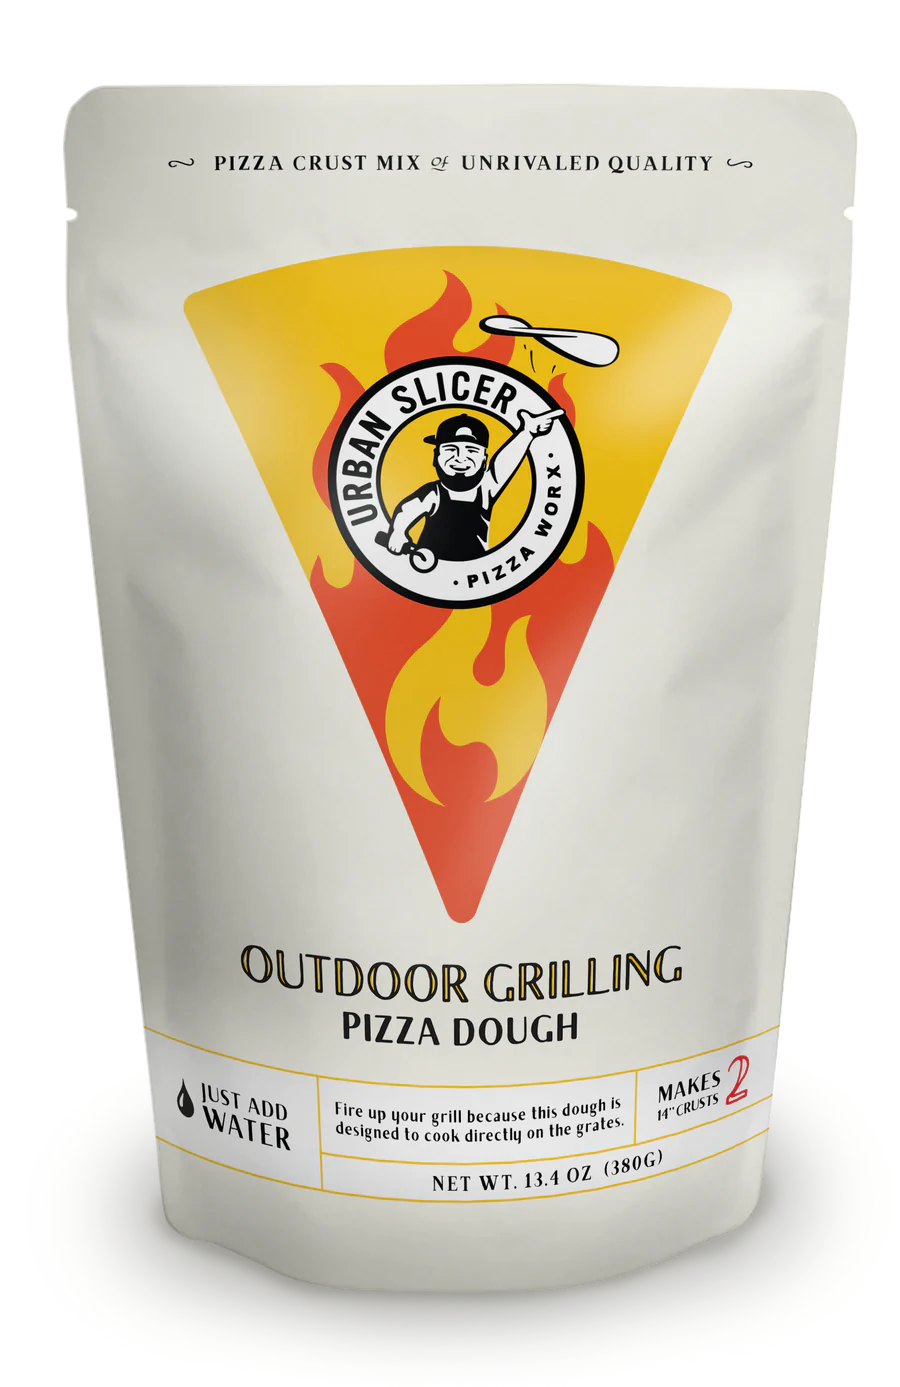 Outdoor Grilling Pizza Dough - Urban Slicer